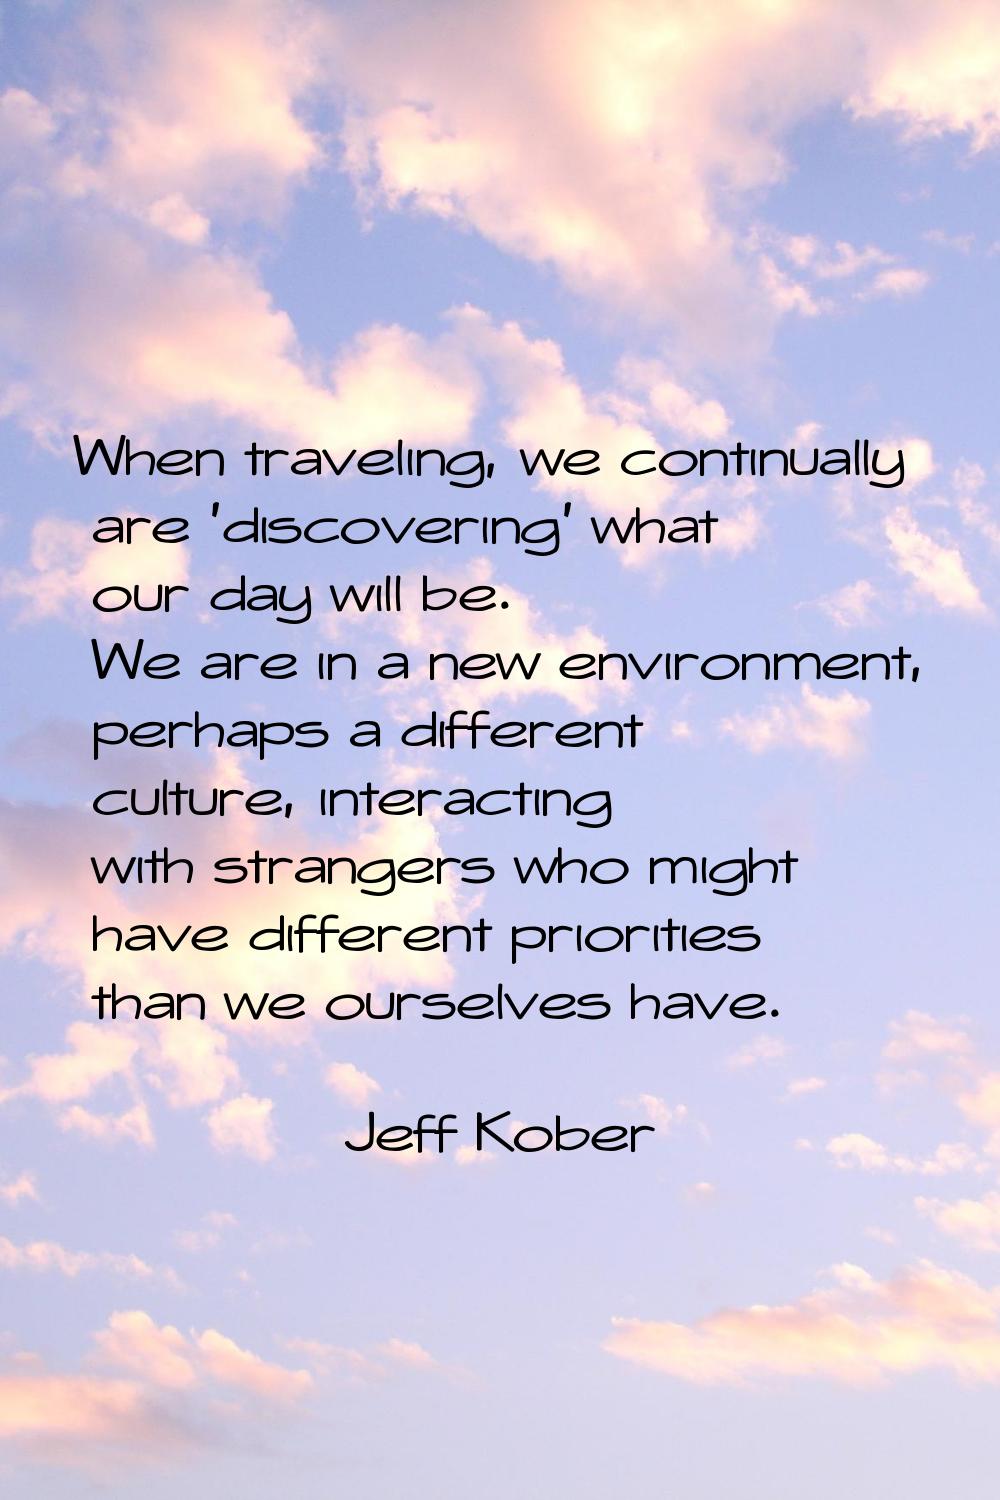 When traveling, we continually are 'discovering' what our day will be. We are in a new environment,